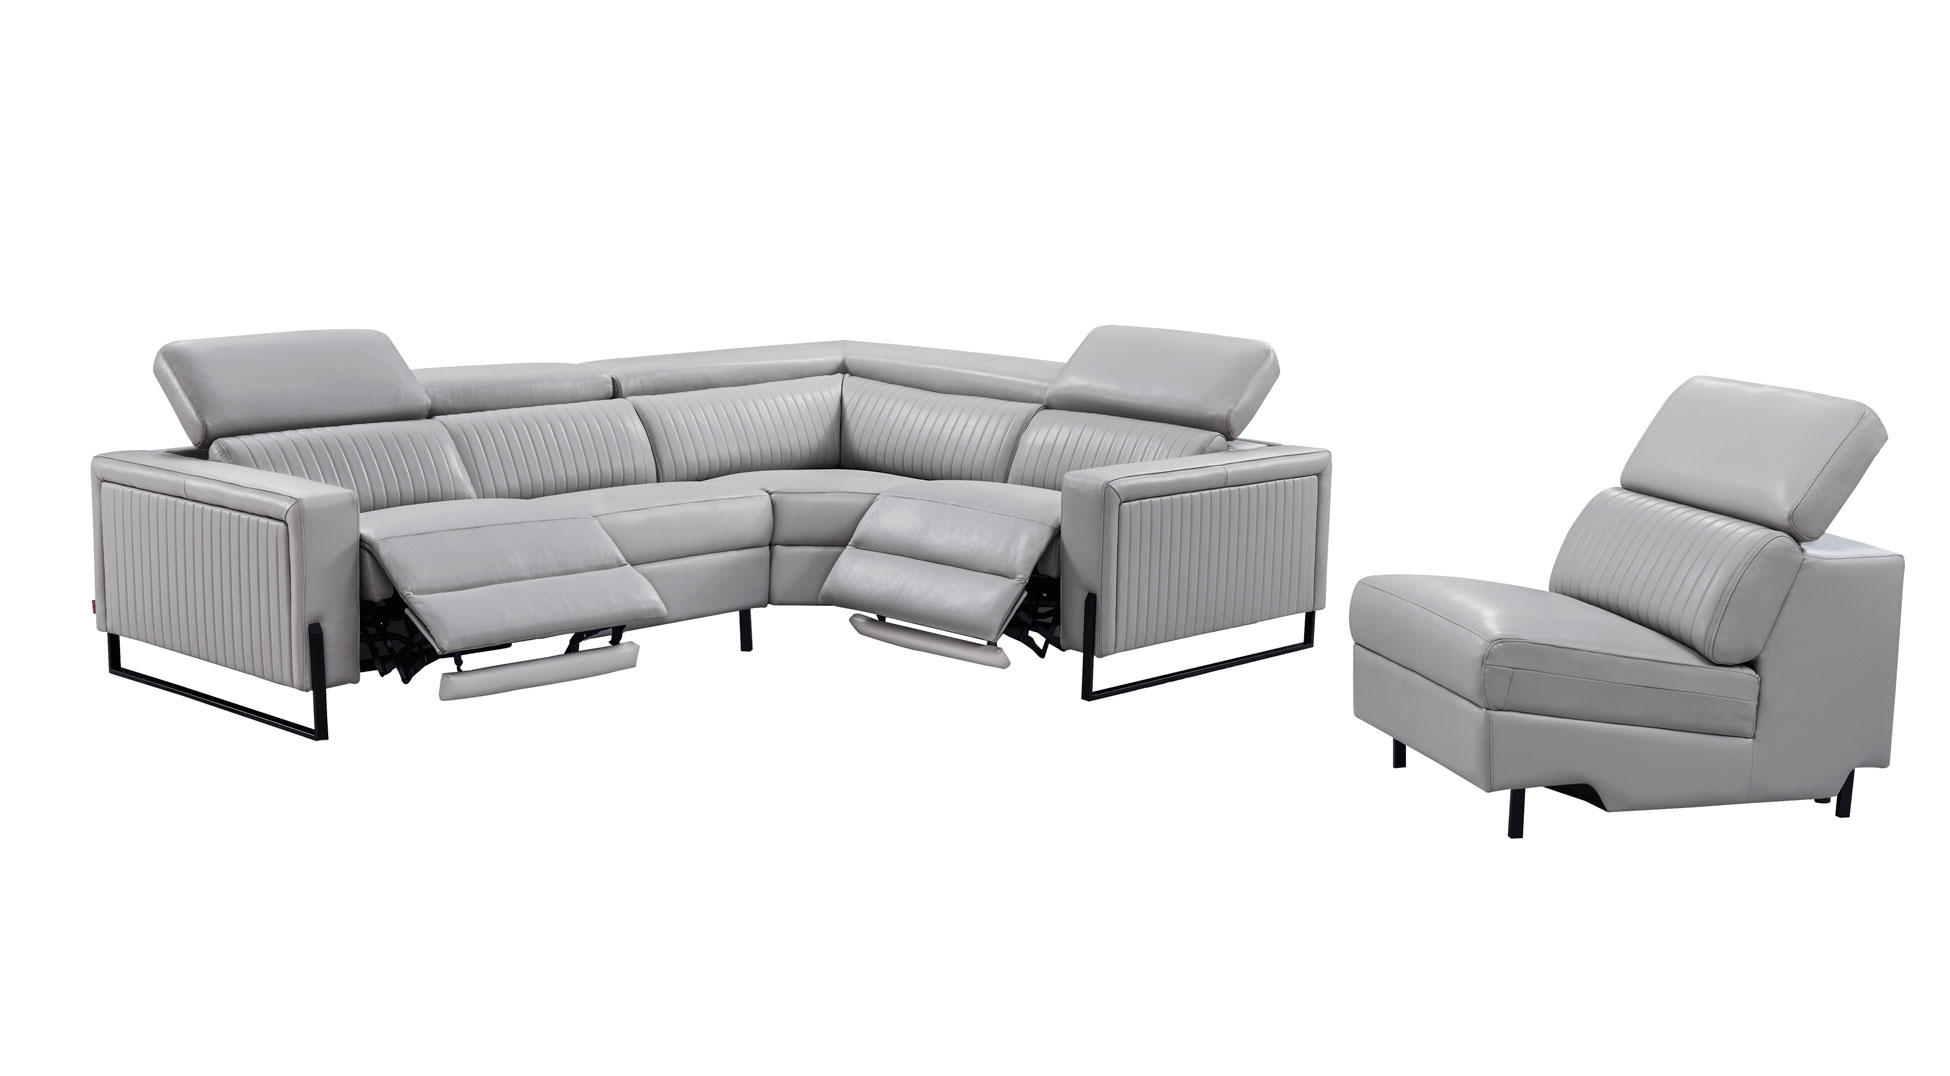 Brands ALF Capri Coffee Tables, Italy 2787 Sectional w/ recliners